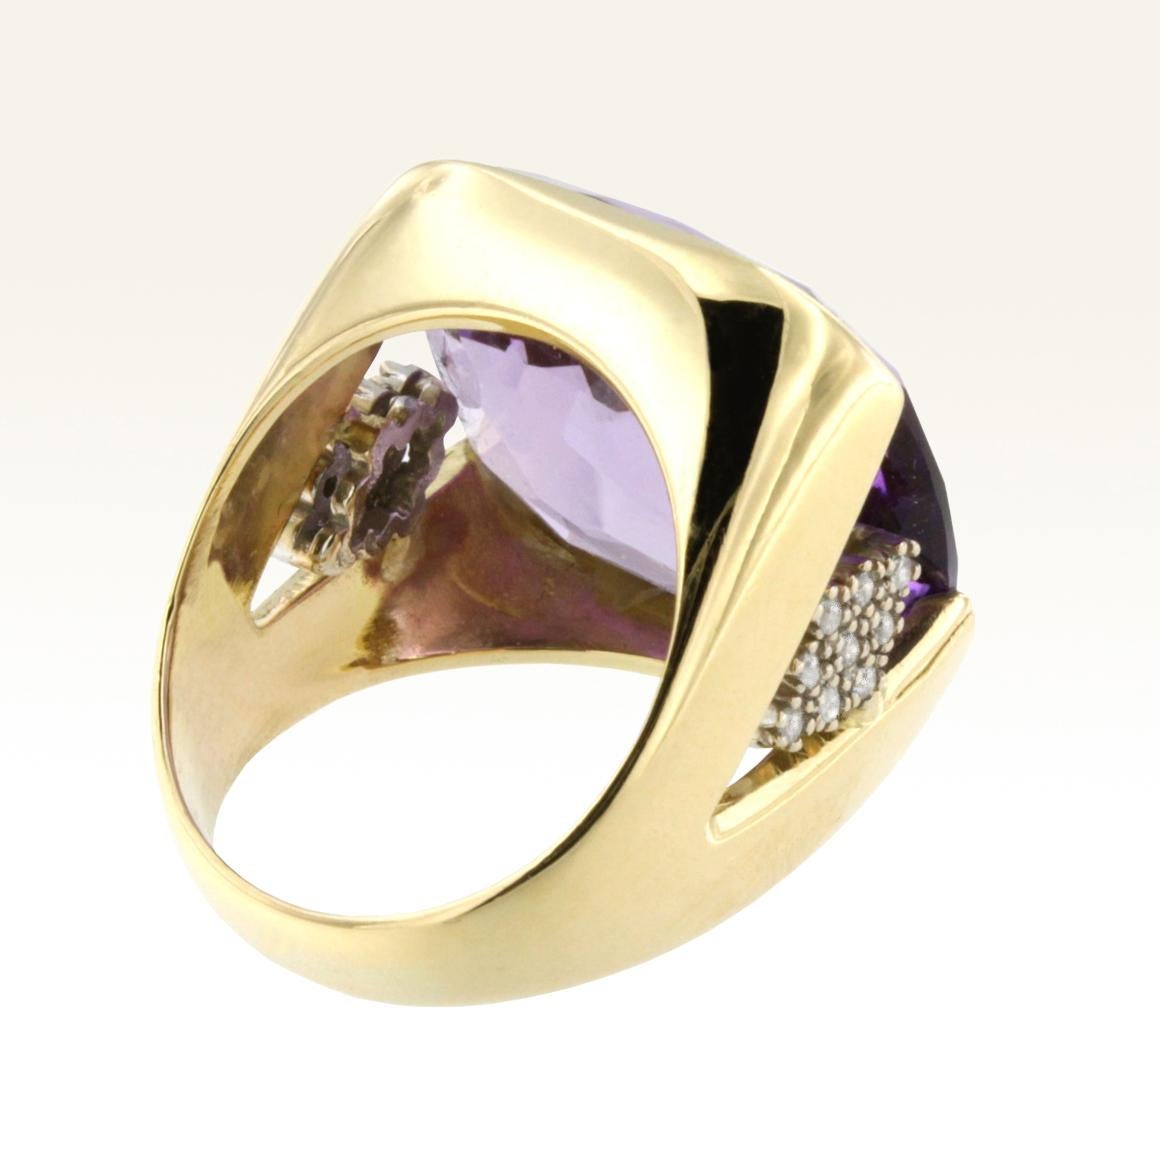 Ring in rose and white gold with Amethist Square cut (size: 20X 20 mm) and White Diamond ct 0.18 VS colour G/H.
Amethyst symbolizes the purity of the soul and humility, with its intense purple color protects against negative thoughts and keeps